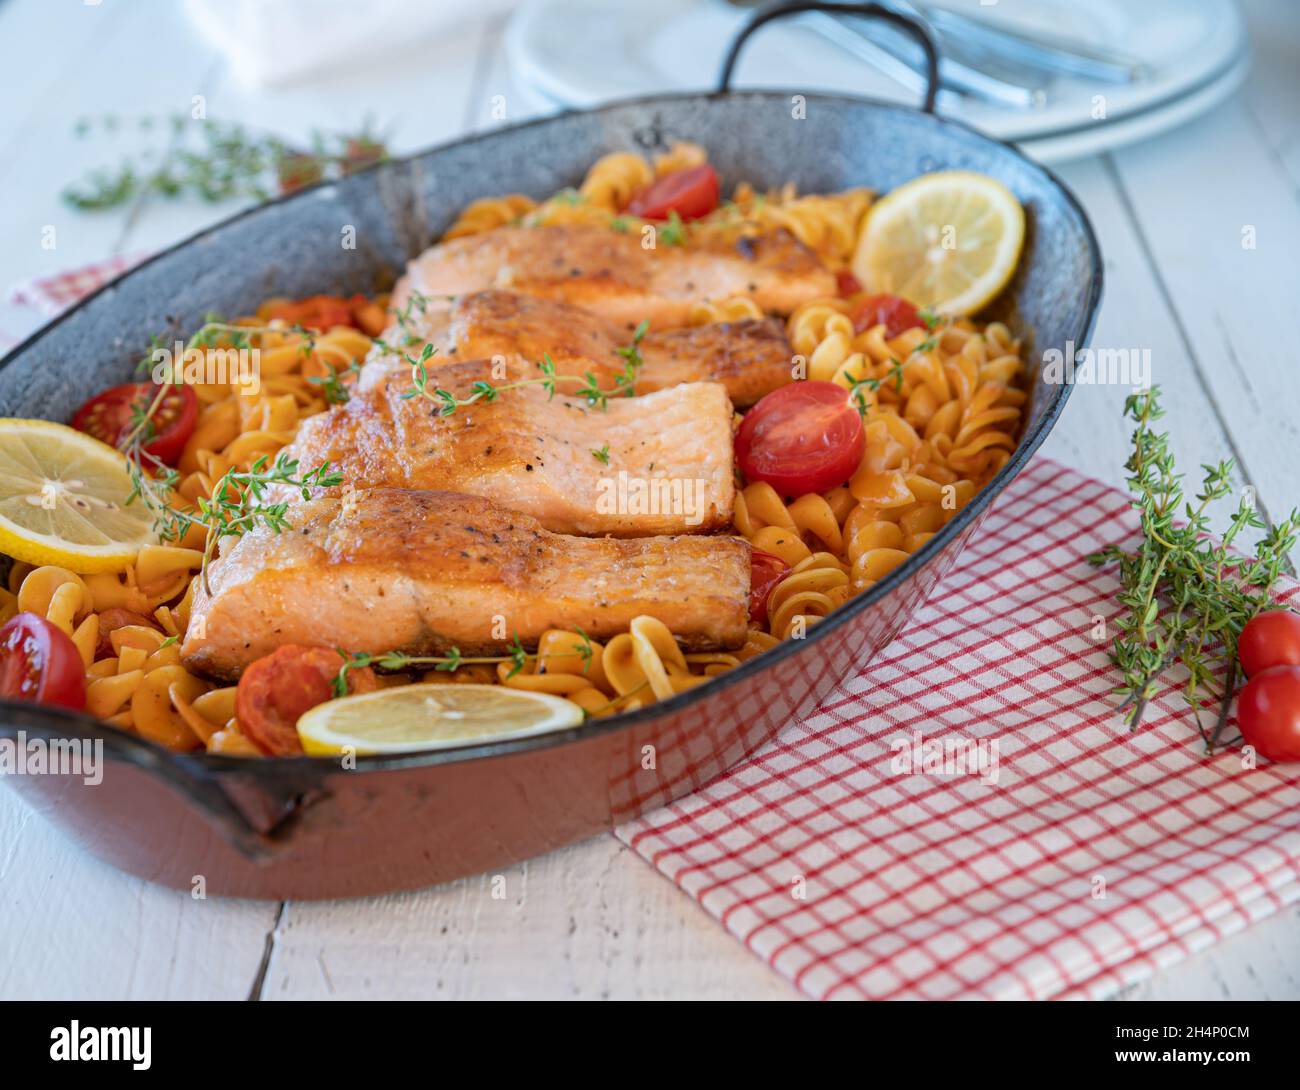 Delicious family meal with fried salmon and pasta in a delicious tomato sauce. Stock Photo